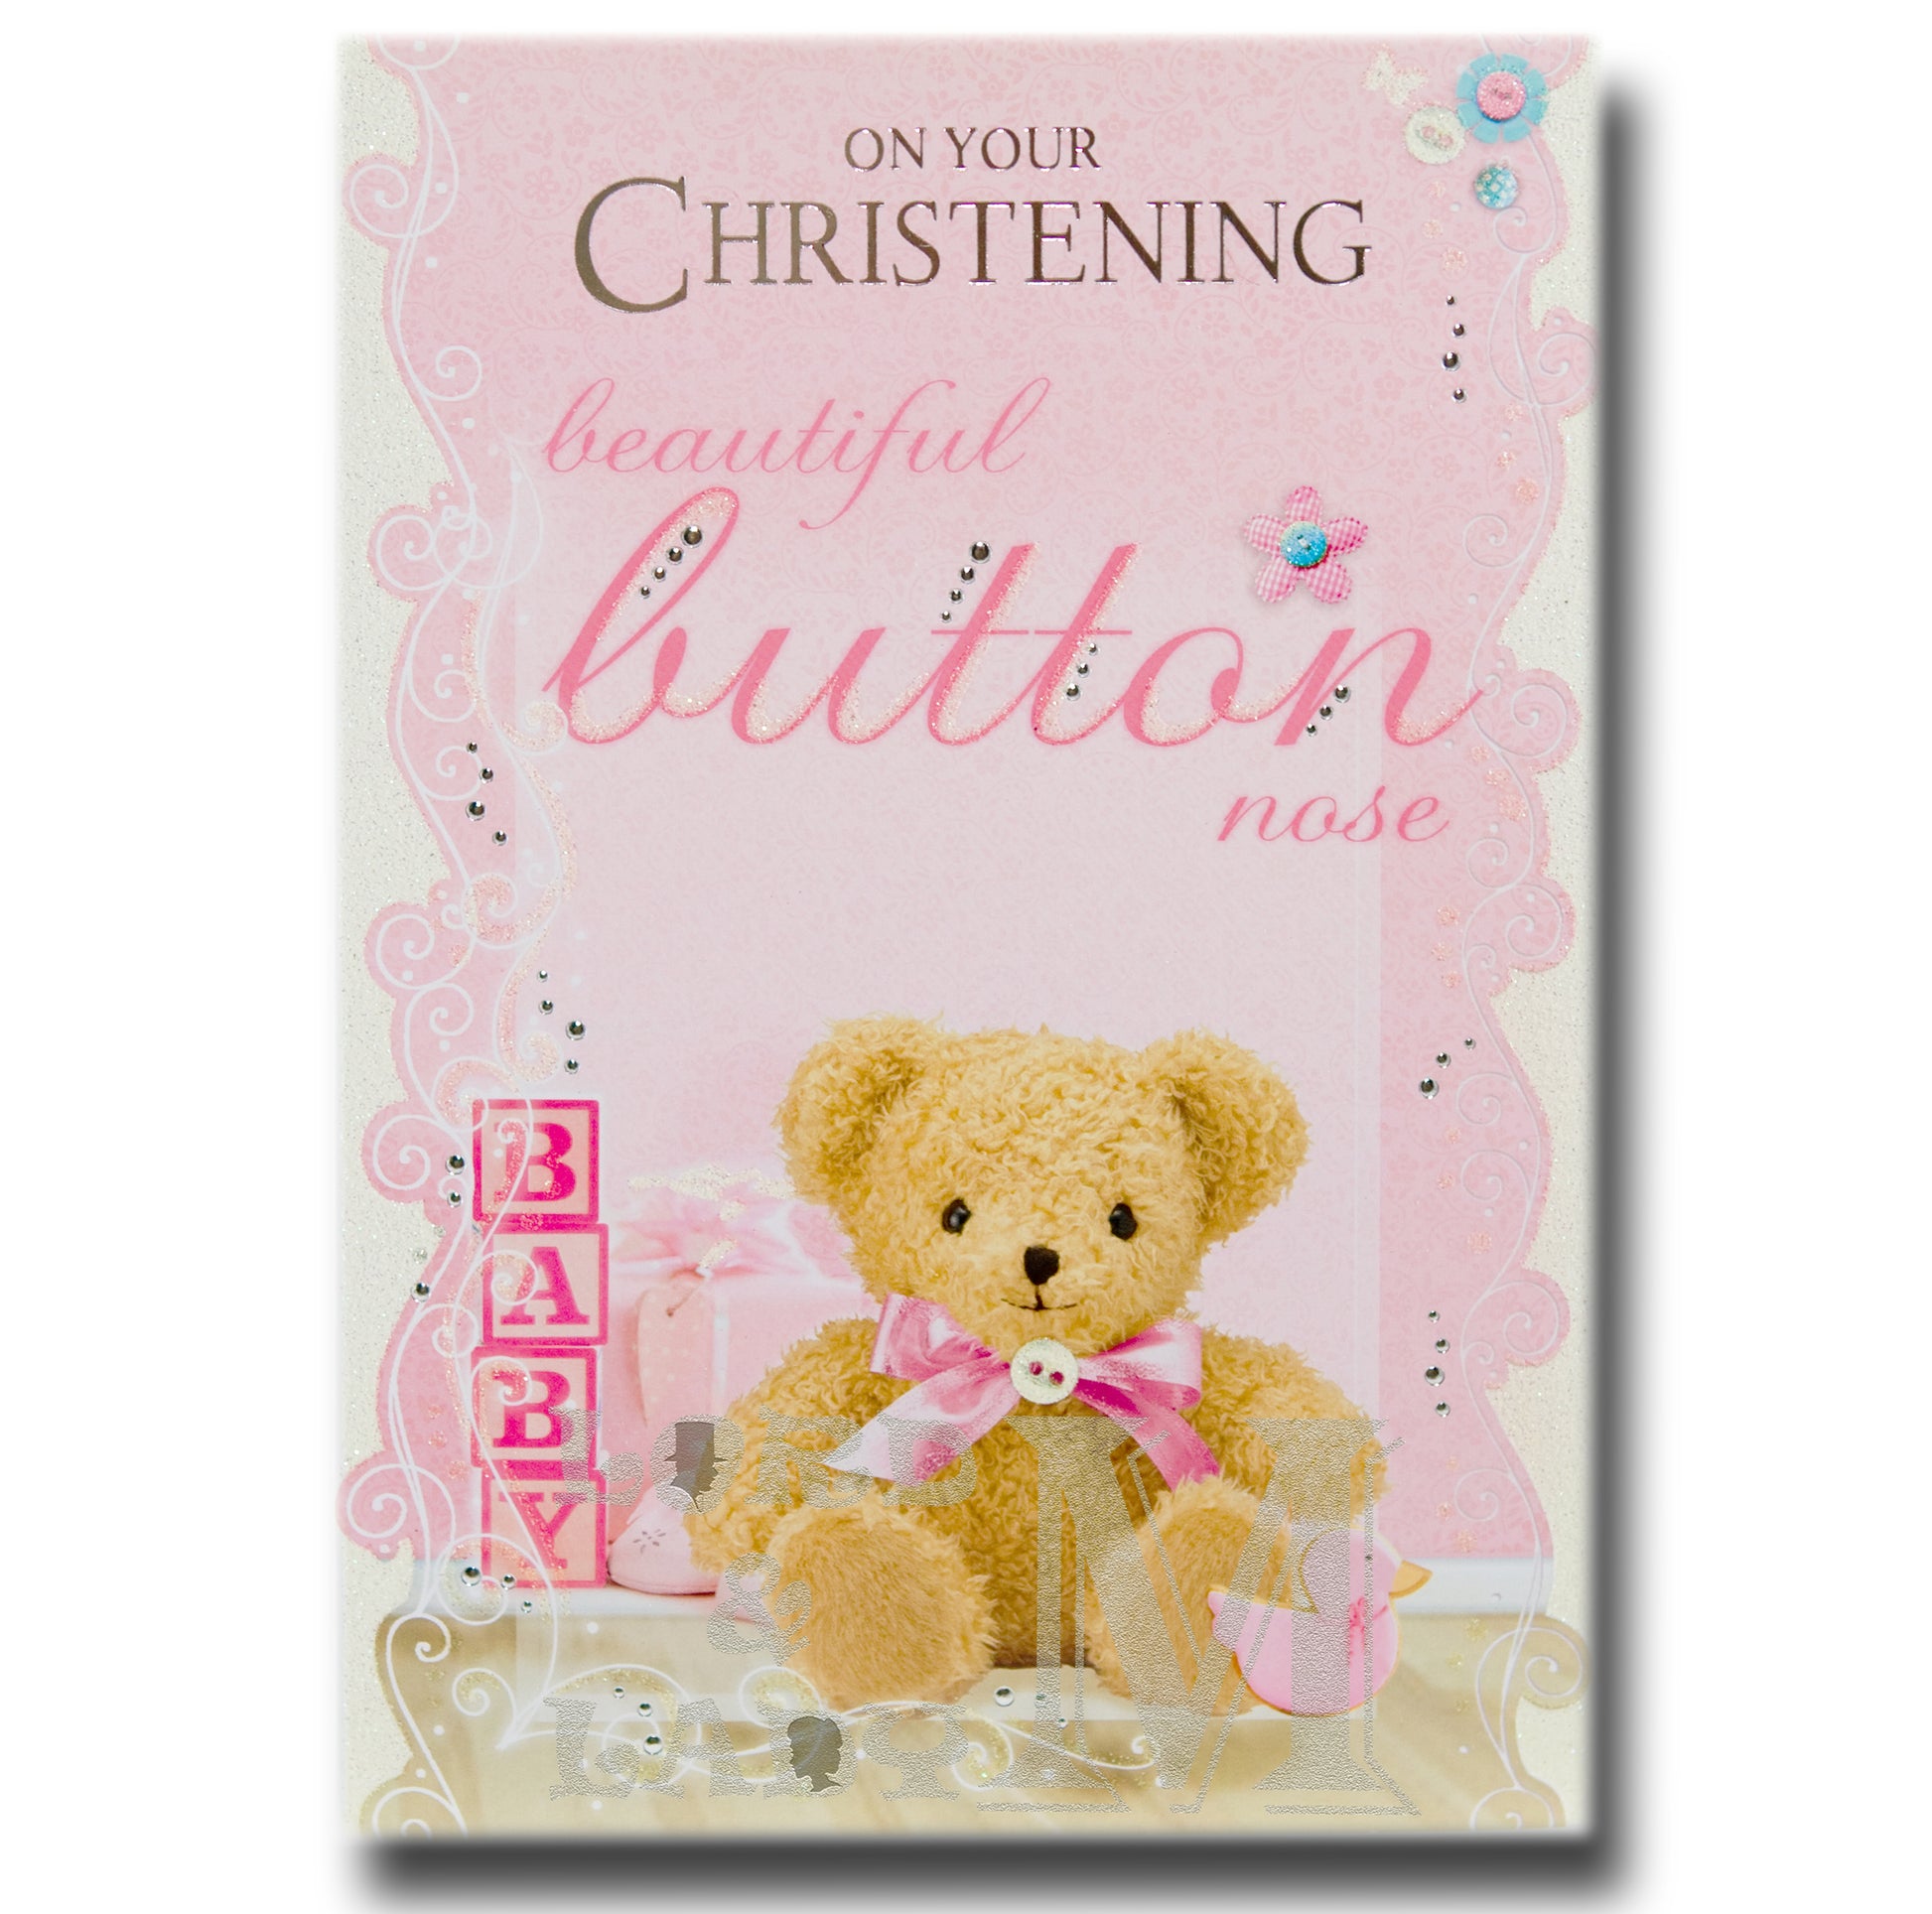 22cm - On Your Christening Beautiful Button Nose